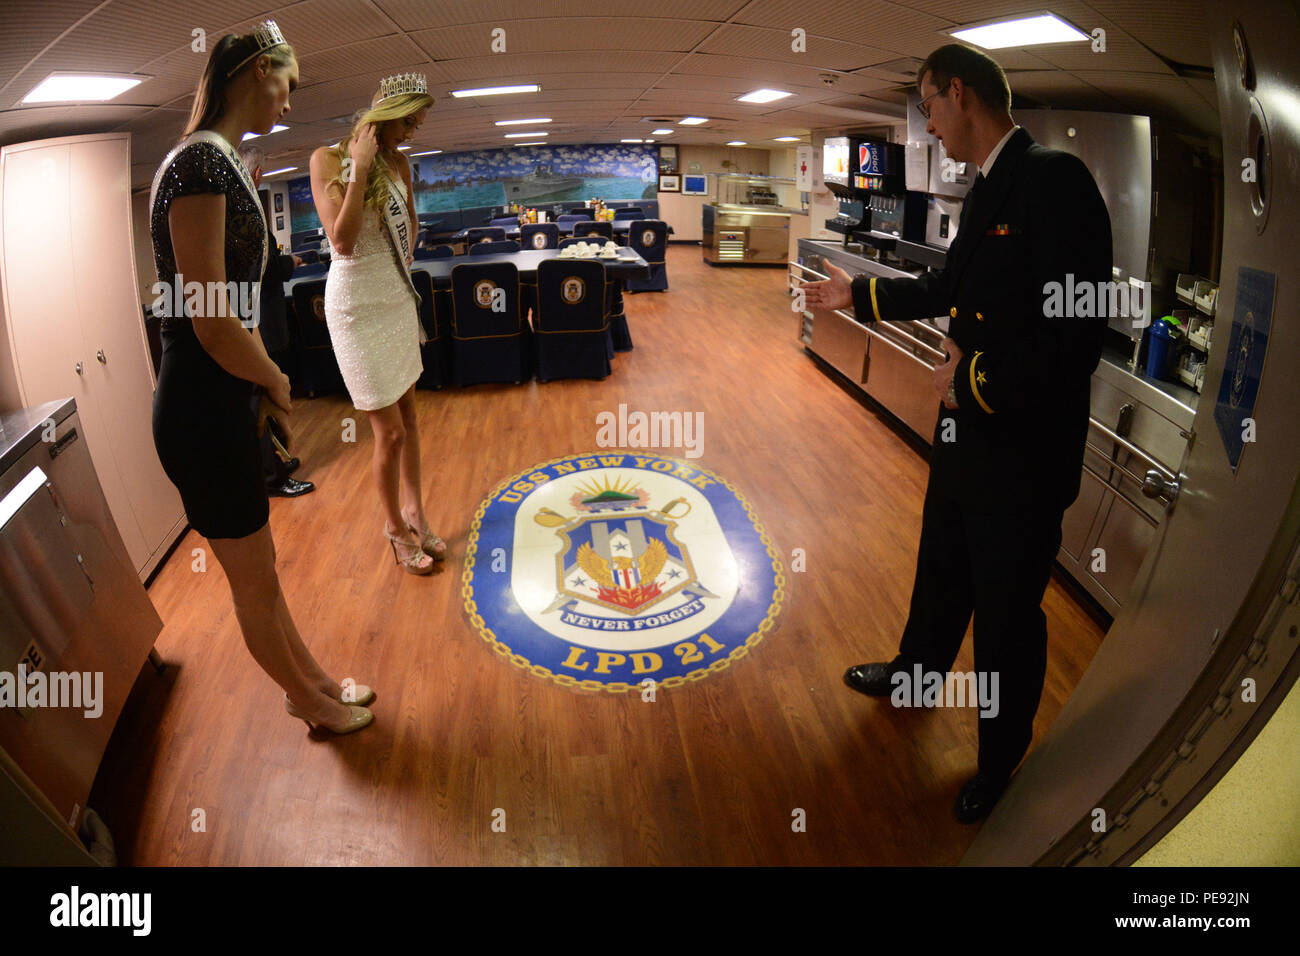 151109-N-WD757-172 NEW YORK (Nov. 9, 2015) Ensign Michael Brown explains the meaning of the ship’s crest to Miss New Jersey USA Jessielyn Palumbo and Miss Wisconsin USA Kate Redeker during a tour aboard the amphibious transport dock ship USS New York (LPD 21) during a formal reception for Veterans Week New York City. Sailors from local Navy units are participating in Veterans Week New York City 2015 to honor the service of all our nation’s veterans. (U.S. Navy photo by Mass Communication Specialist 1st Class Carlos M. Vazquez II/Released) Stock Photo